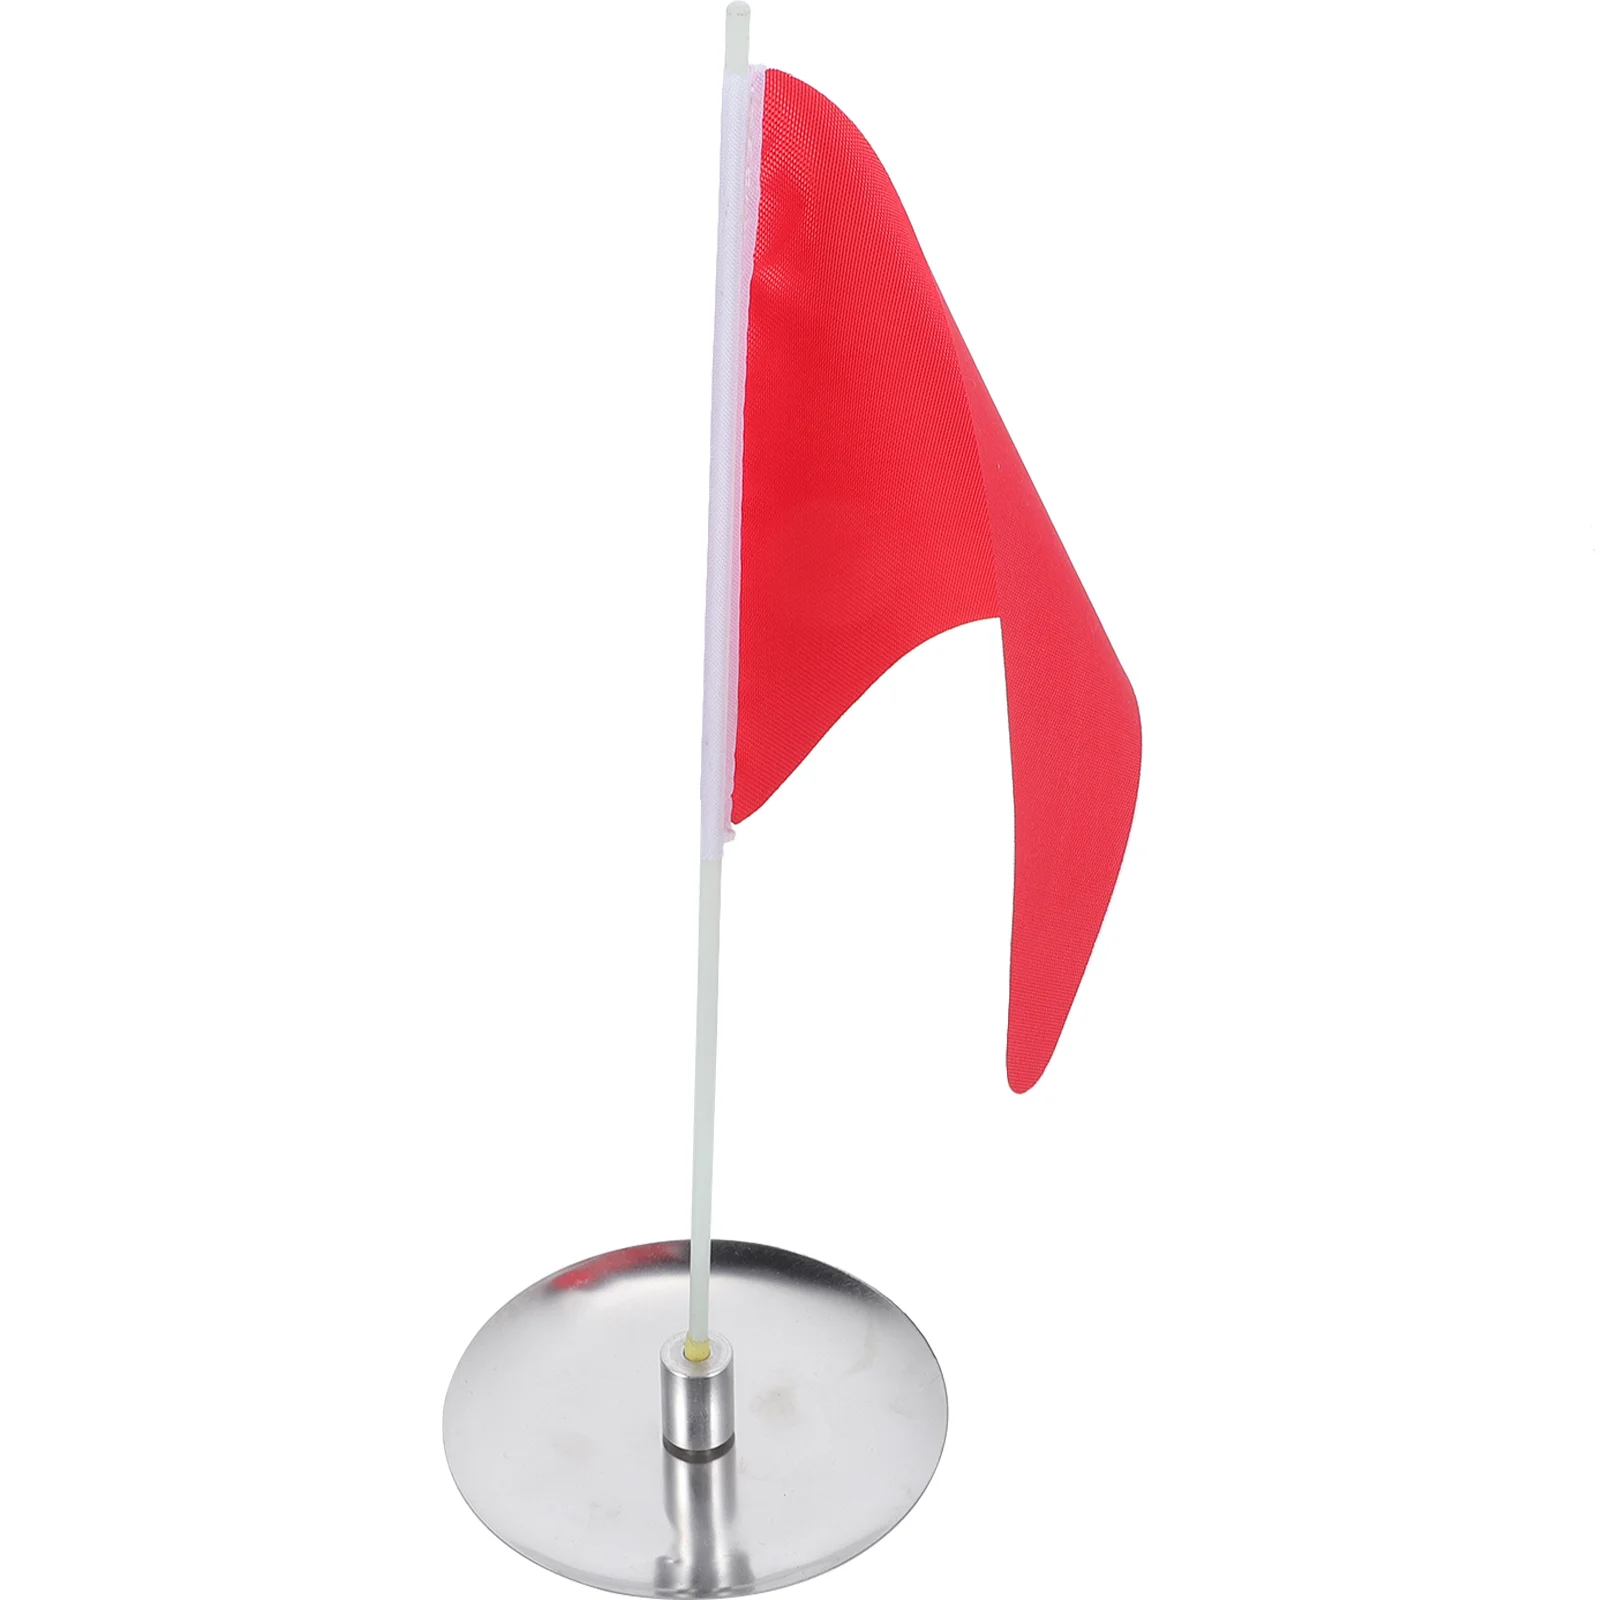 

Golf Flagpole Practice Putting Portable Golfing for Small Oxford Cloth Training Man Hole Cup Tray Court Golfs